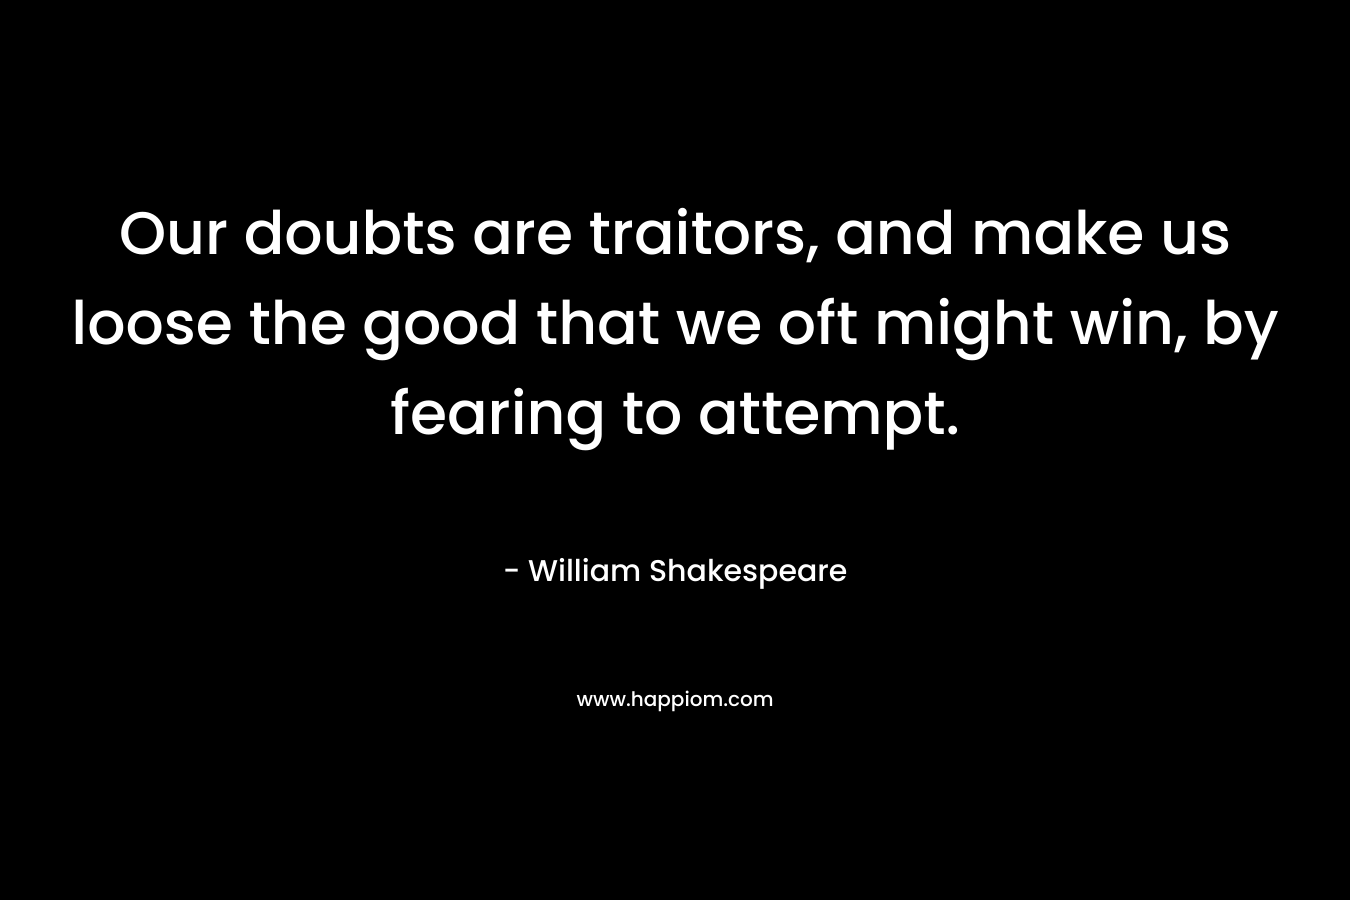 Our doubts are traitors, and make us loose the good that we oft might win, by fearing to attempt. – William Shakespeare